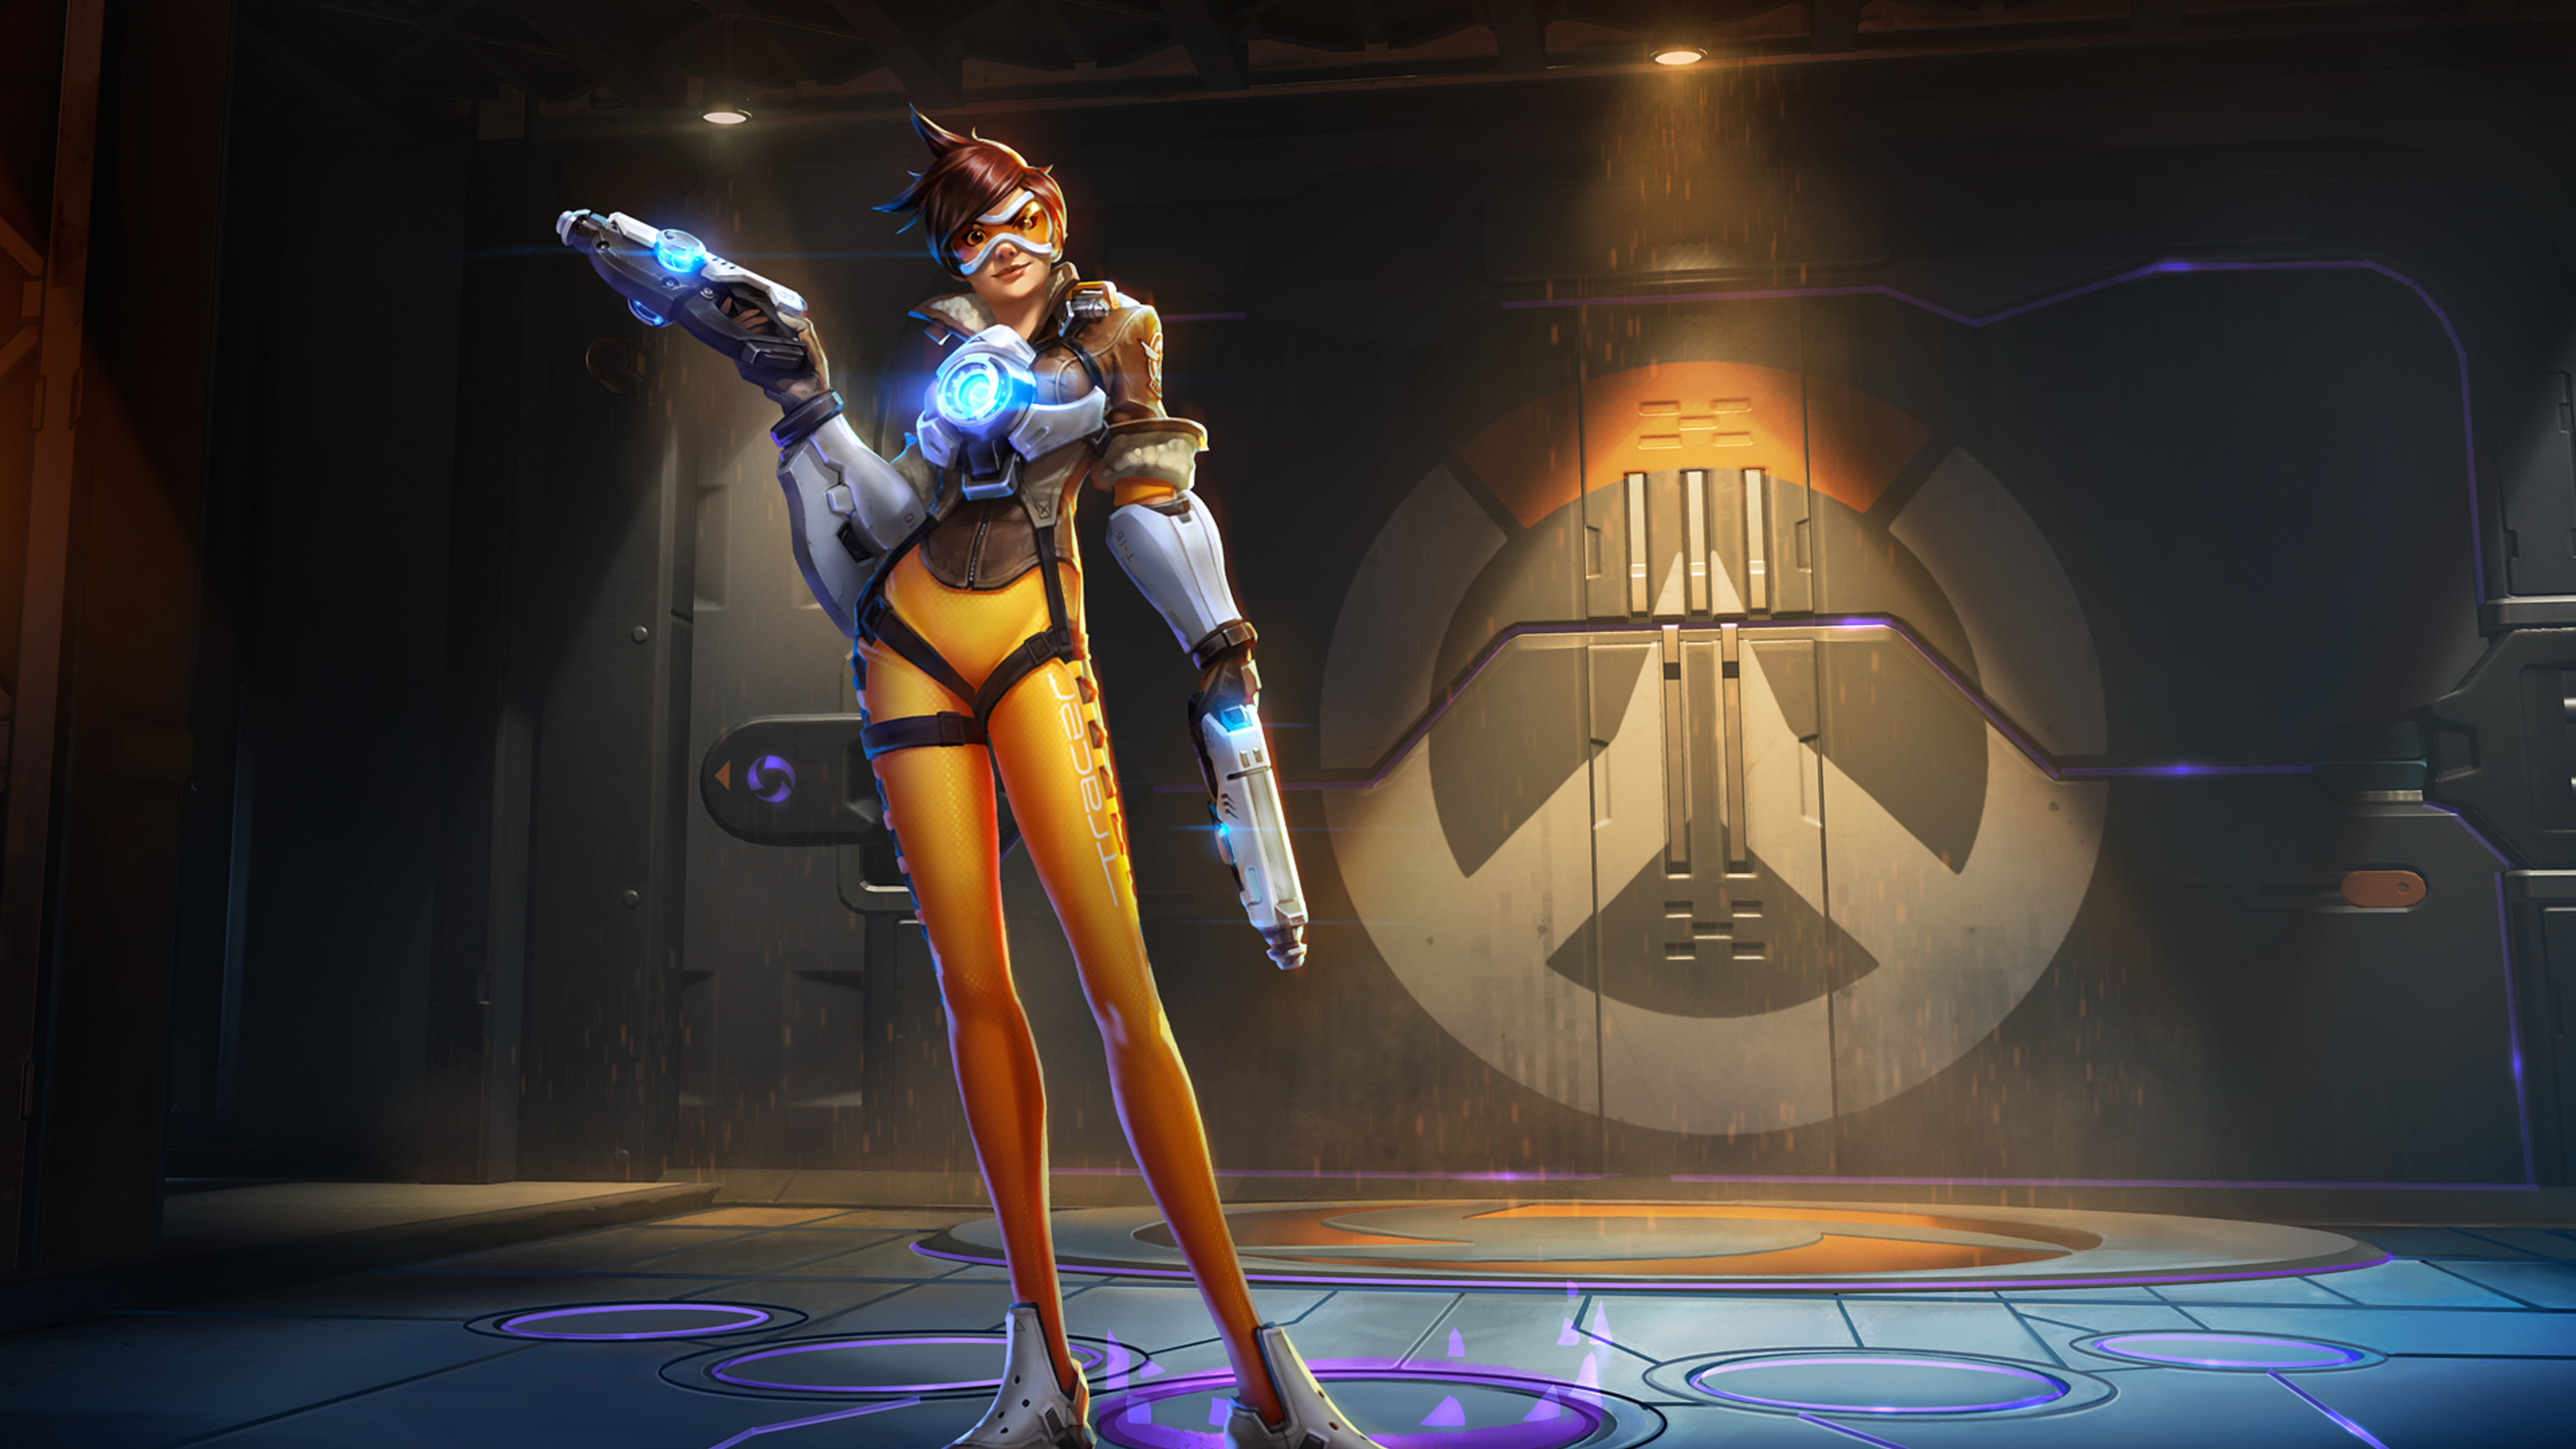 Overwatch Tracer xbox games wallpapers, ps games wallpapers, pc games  wallpapers, overwatch wallpapers, games w…